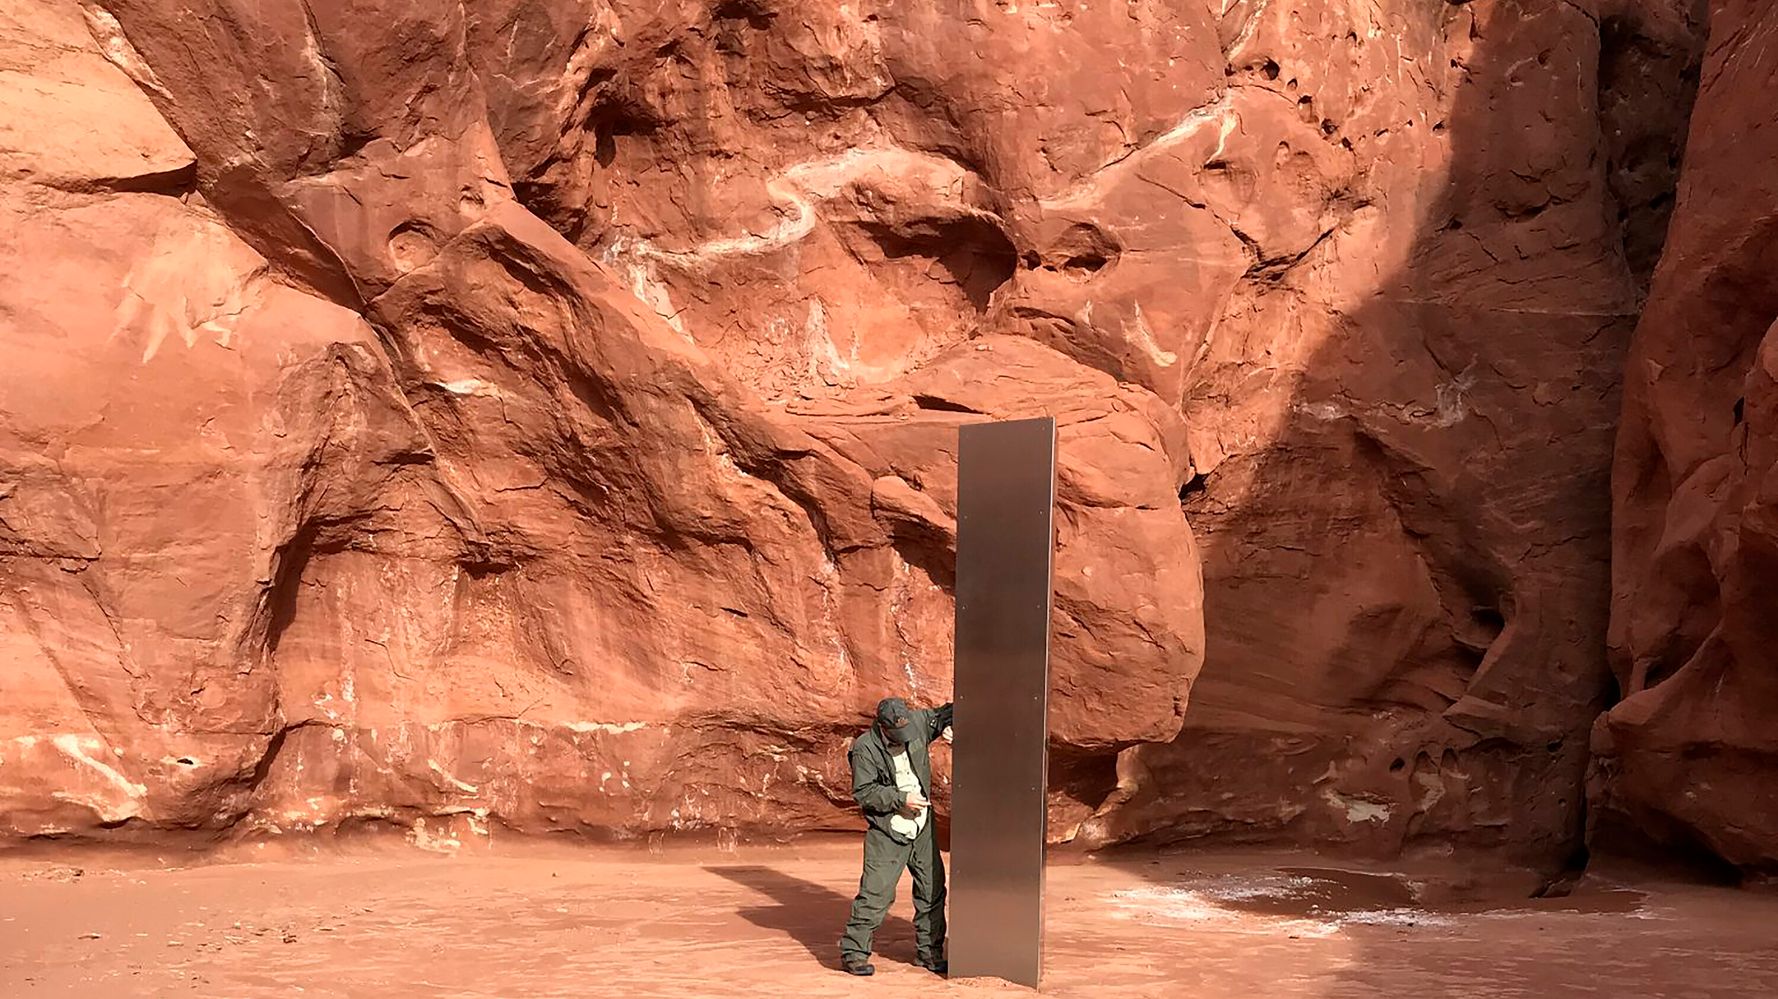 Monolith Visitor Says It Was Toppled By Group Who Said ‘Leave No Trace’